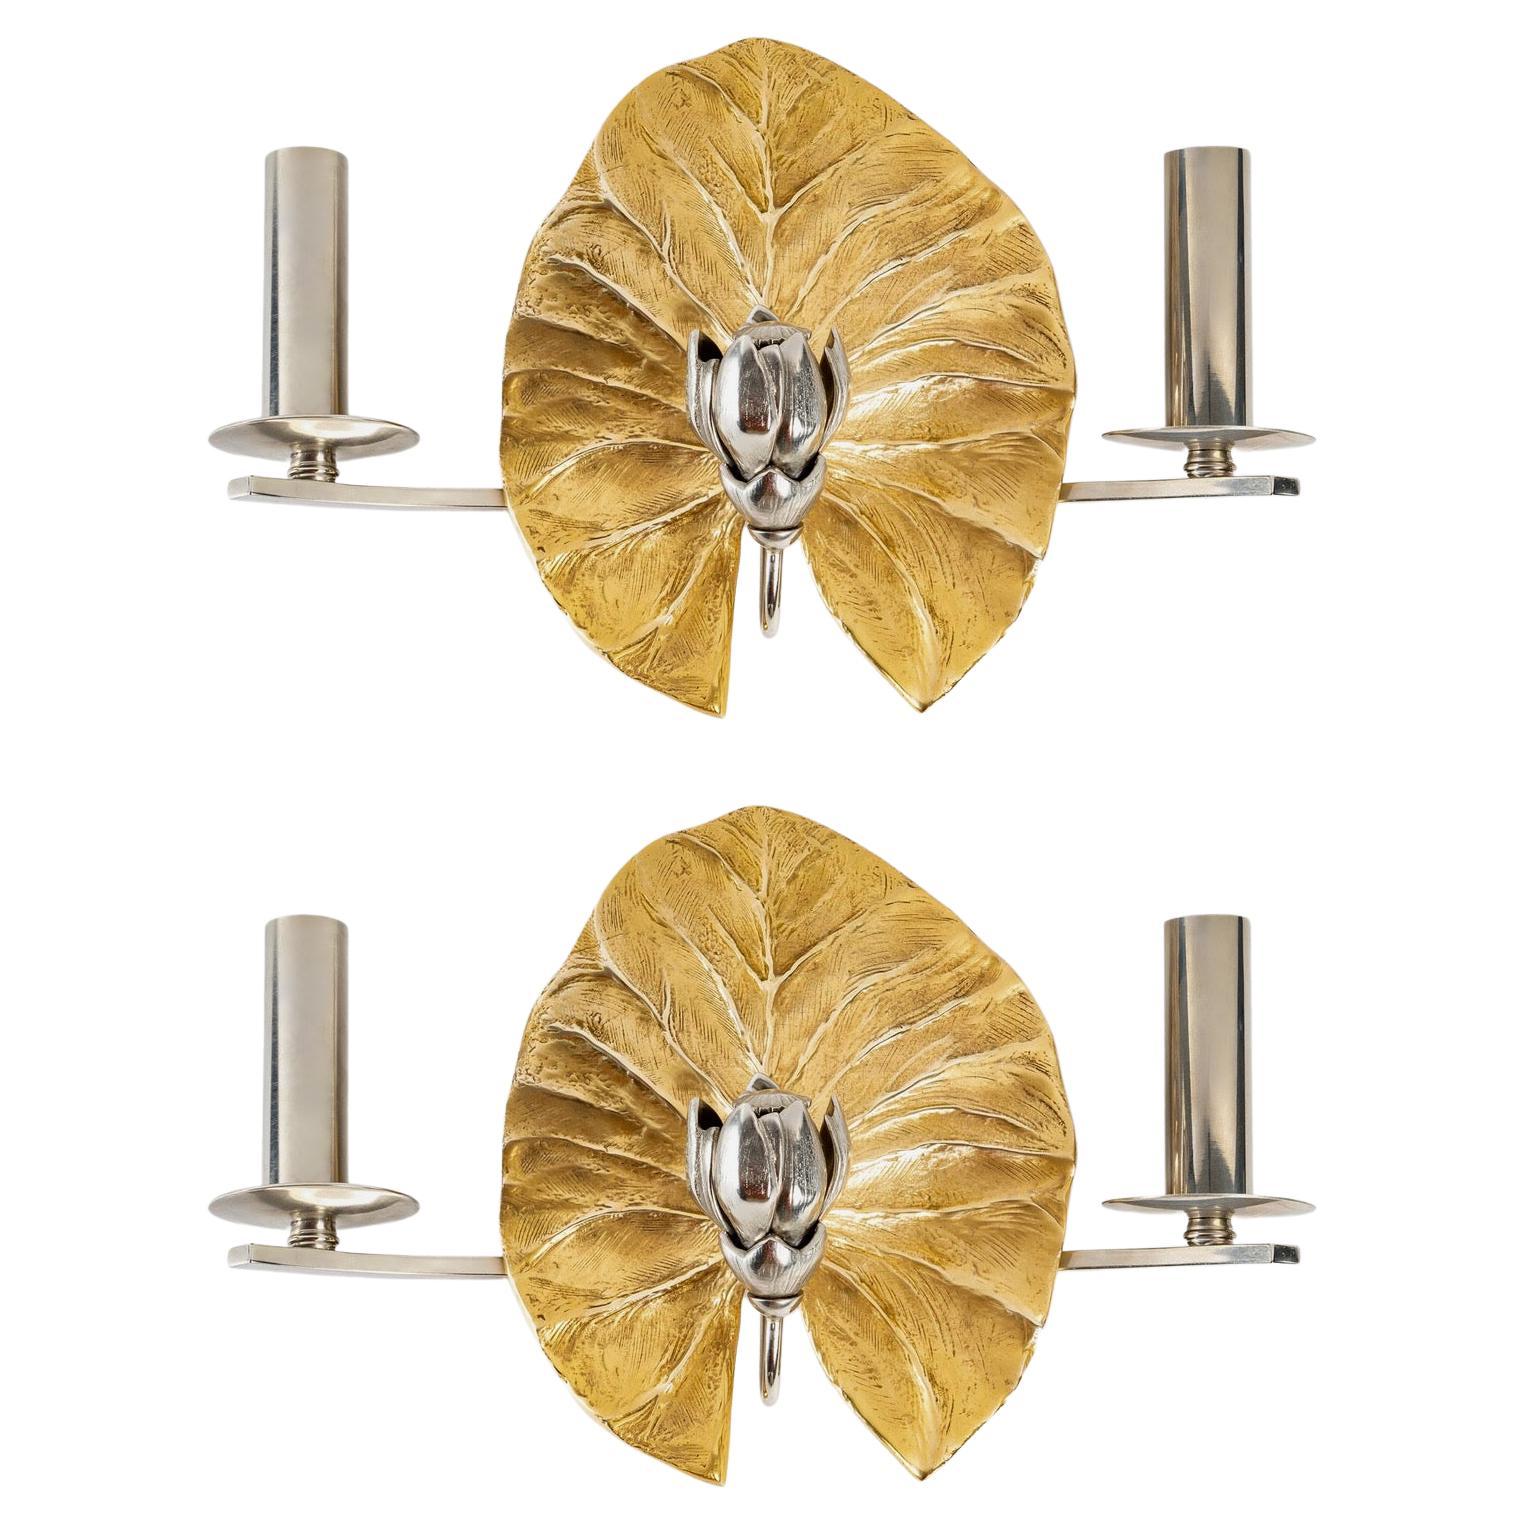 1970 Pair of Sconces "Waterlily " Signed by Chrystiane Charles